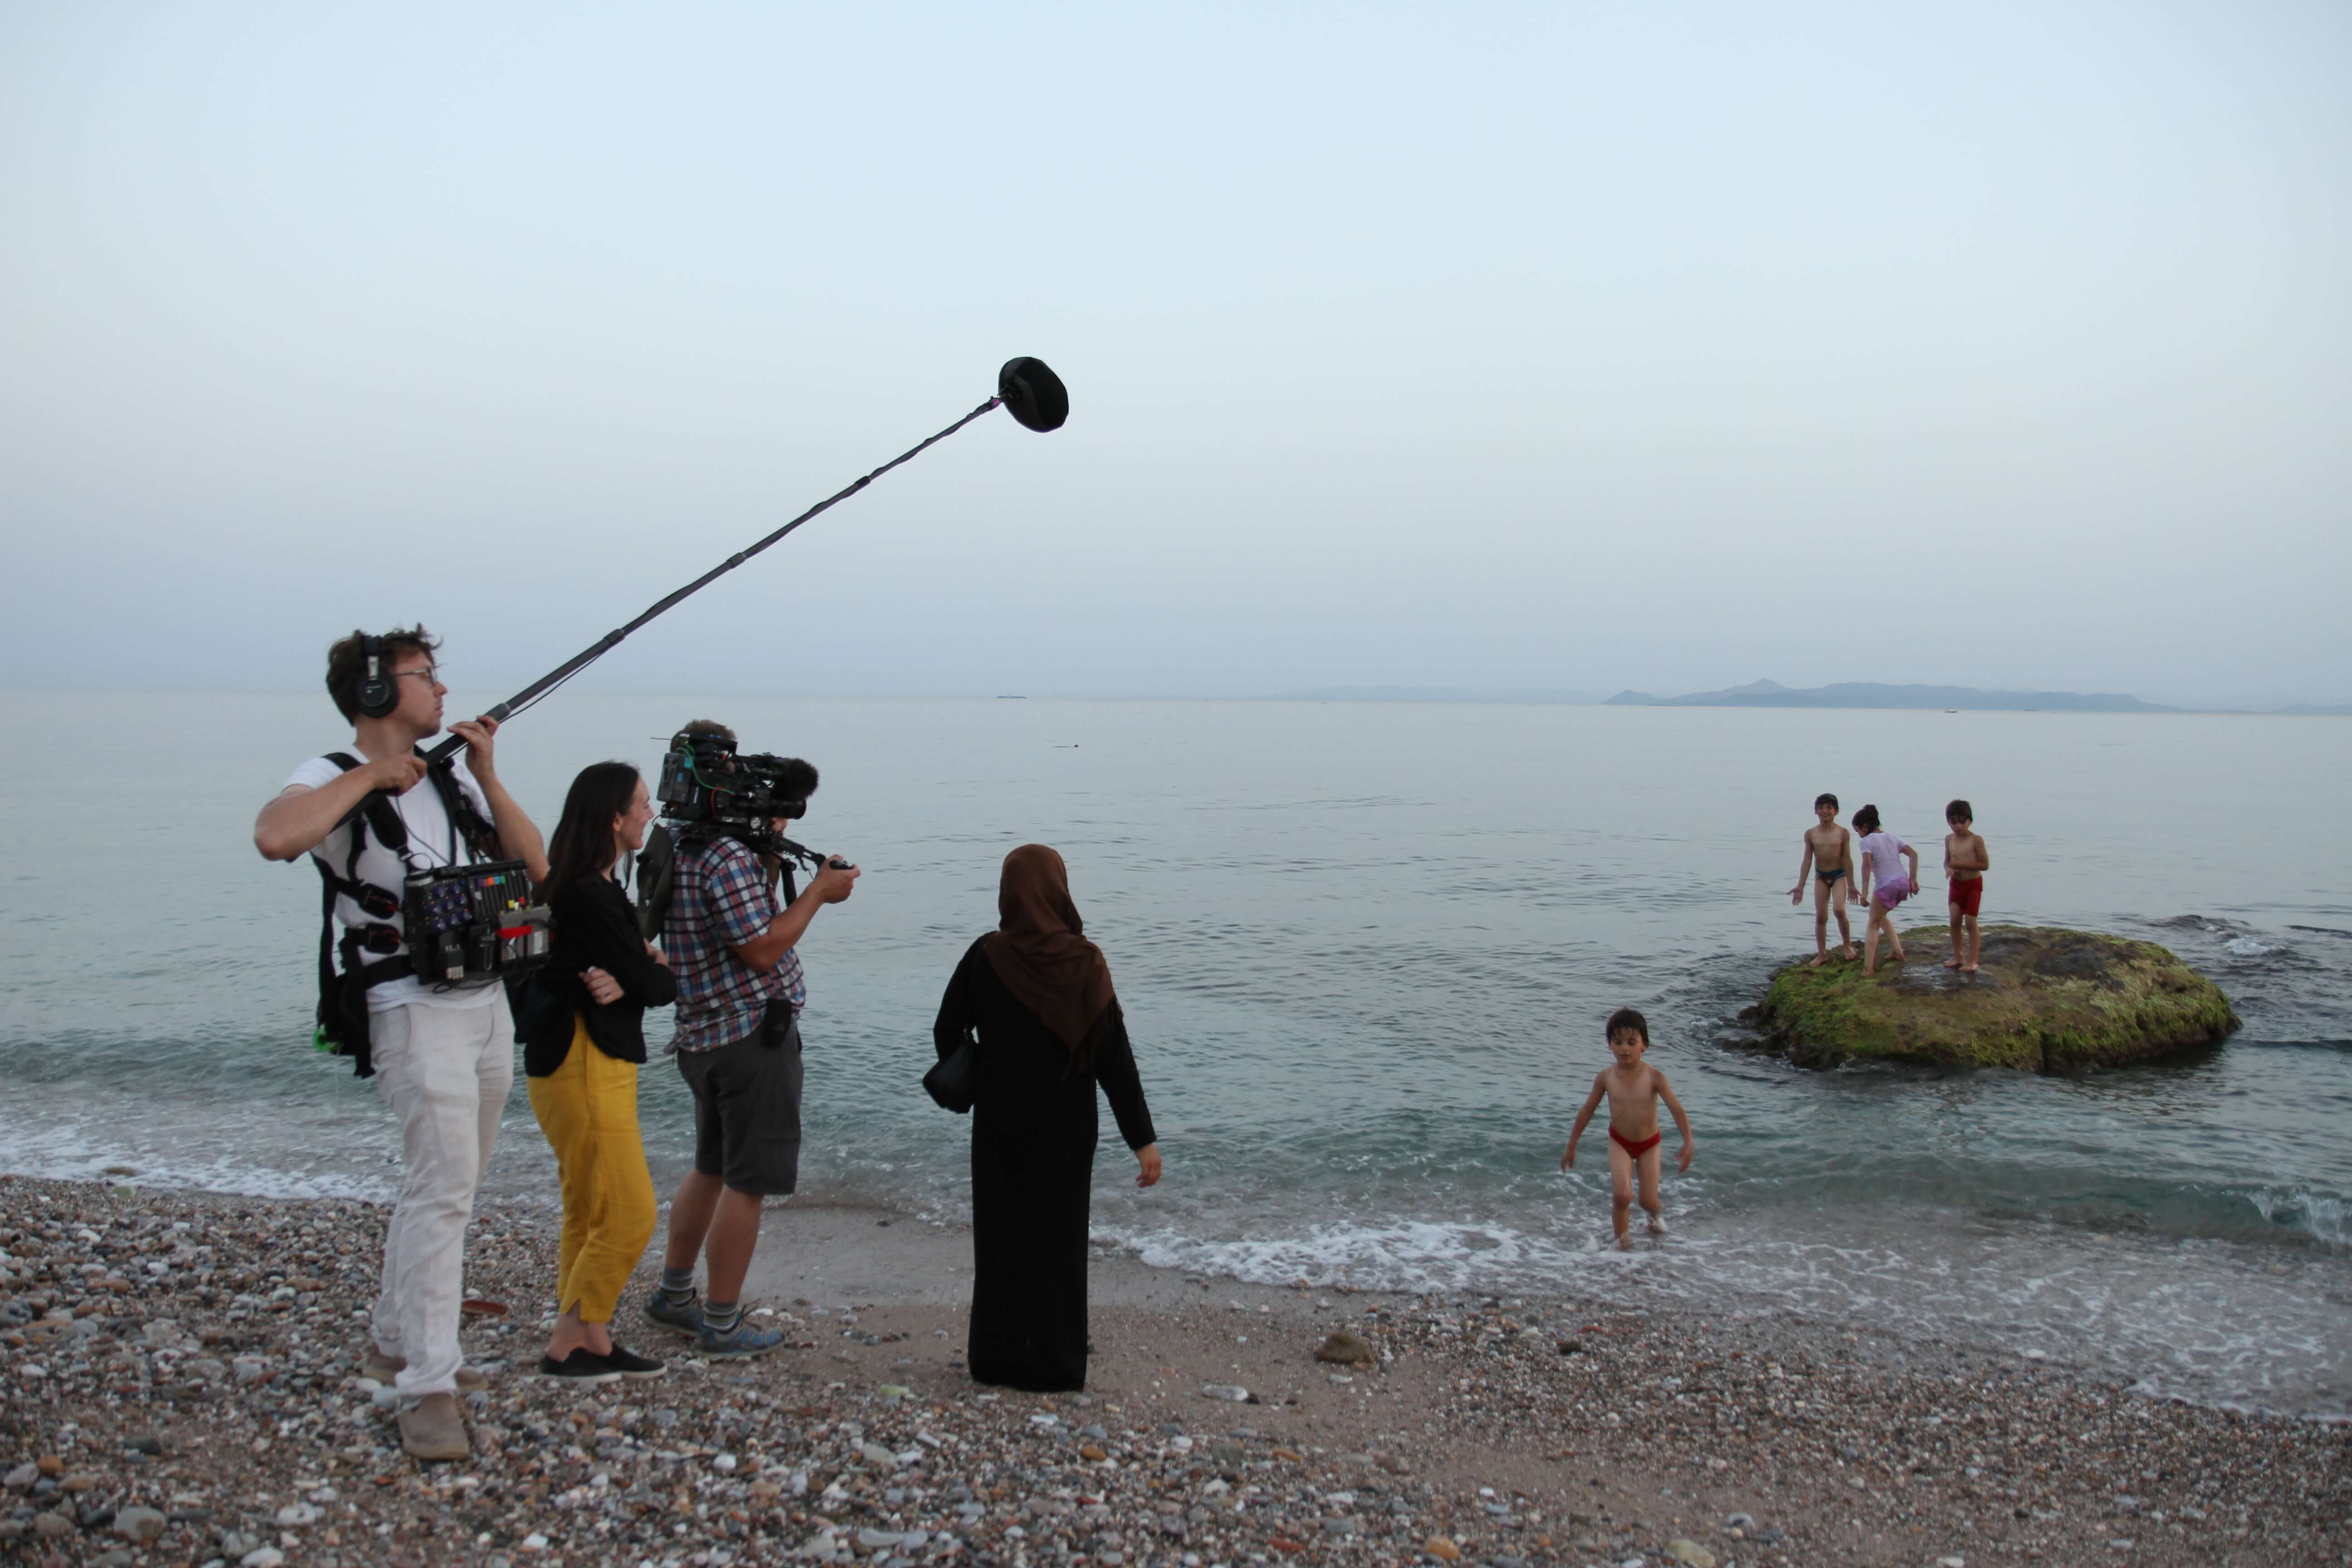 Production still from As Simple As Water. Director Megan Mylan, and her cameraman and audio person, follow a family playing on the ocean shore. The mother waits while the children play in the water.